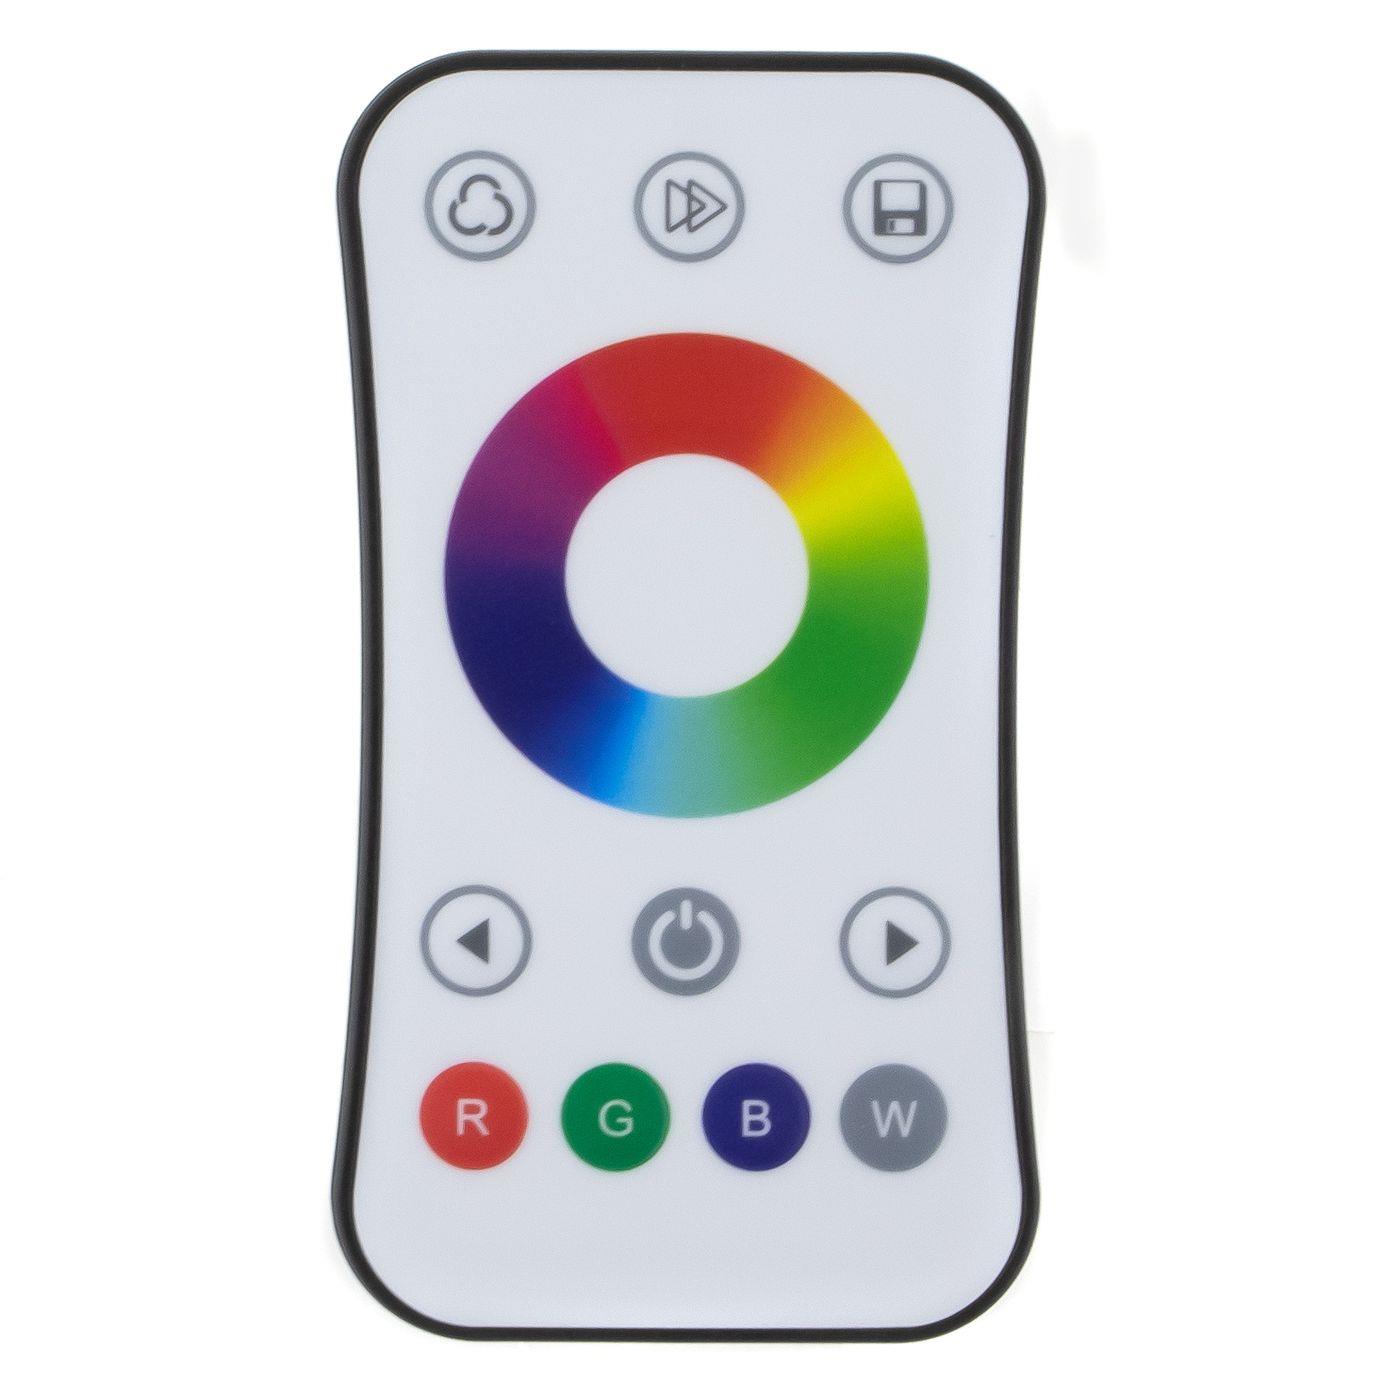 Elegance RGB RGBW LED Remote control Touch White for colour changing strips 4-Pin + 5-Pin